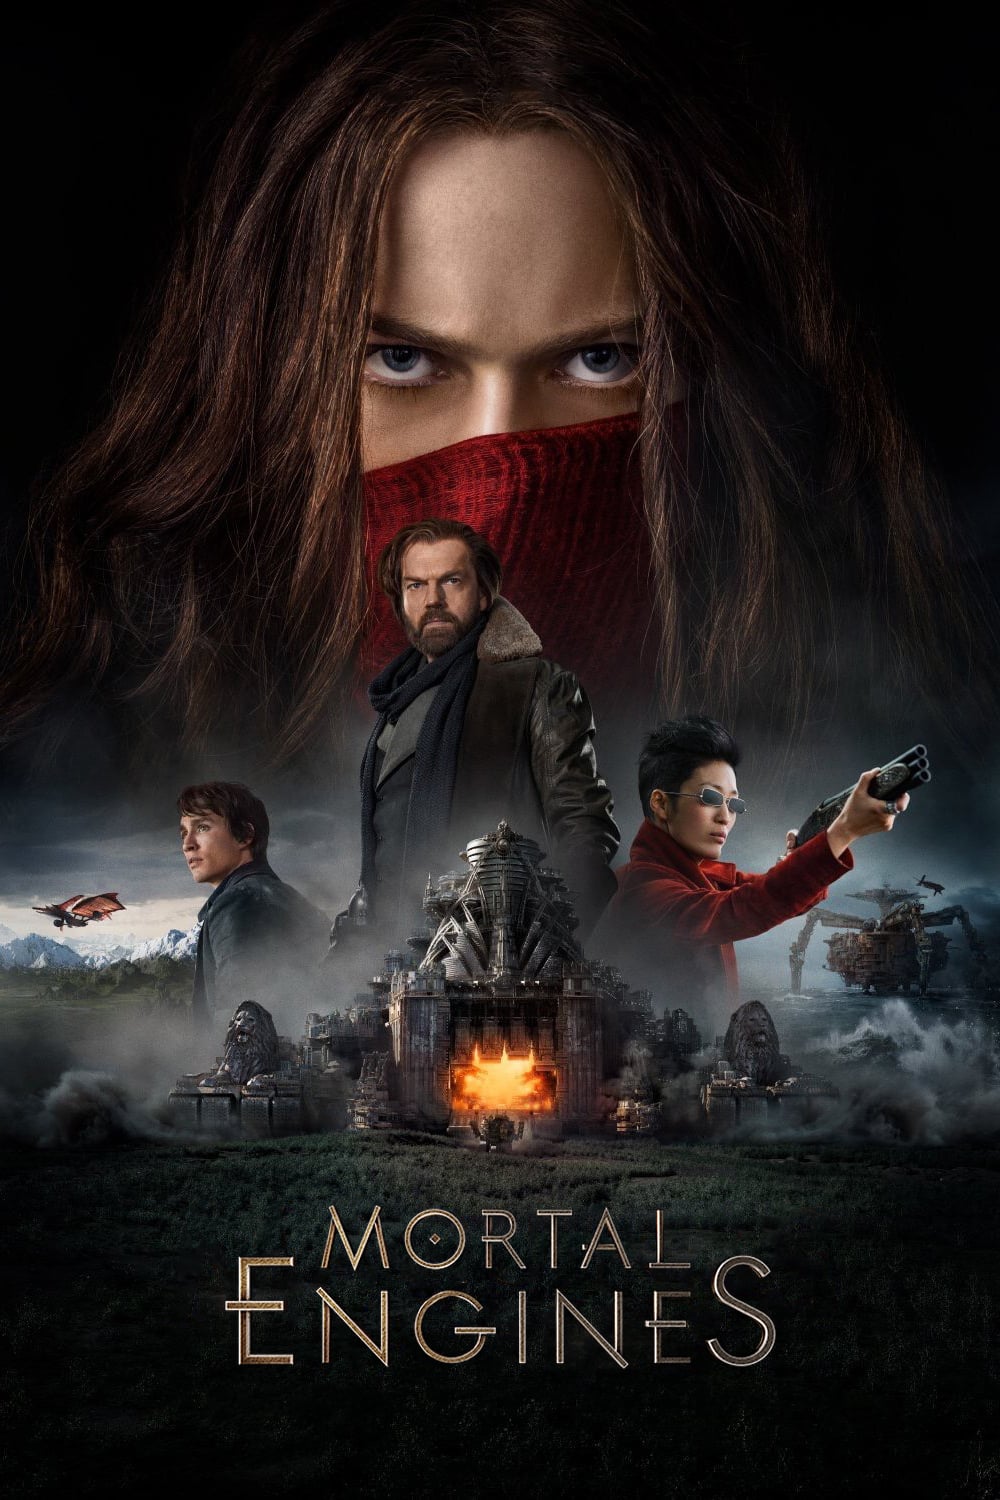 Poster for the movie "Mortal Engines"